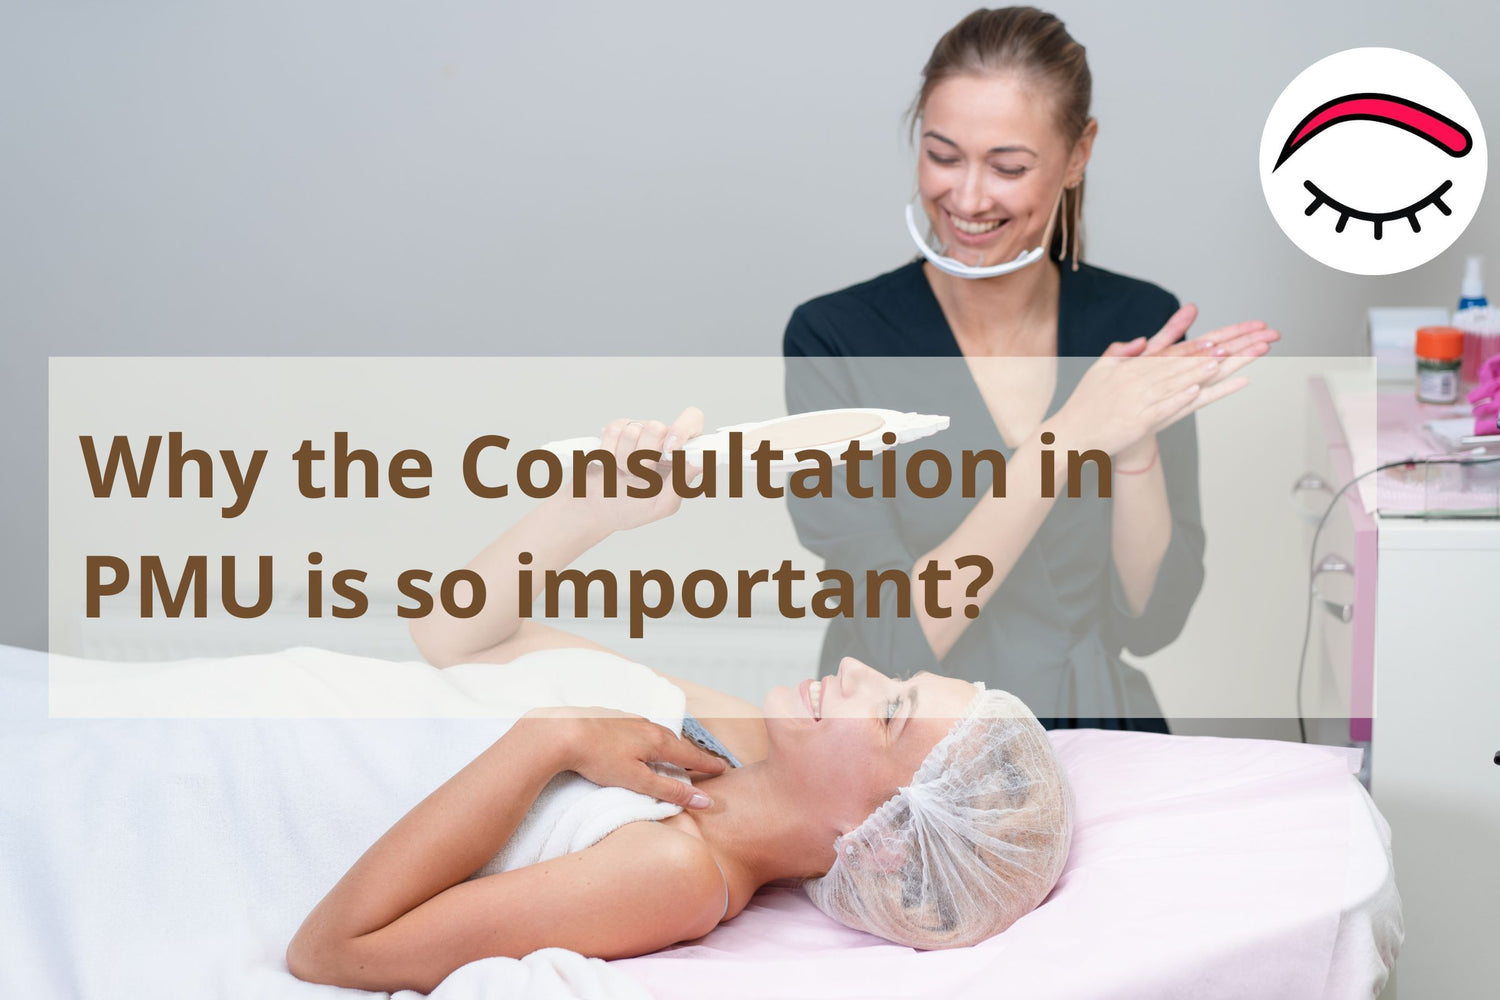   Why the Consultation in PMU is so important?